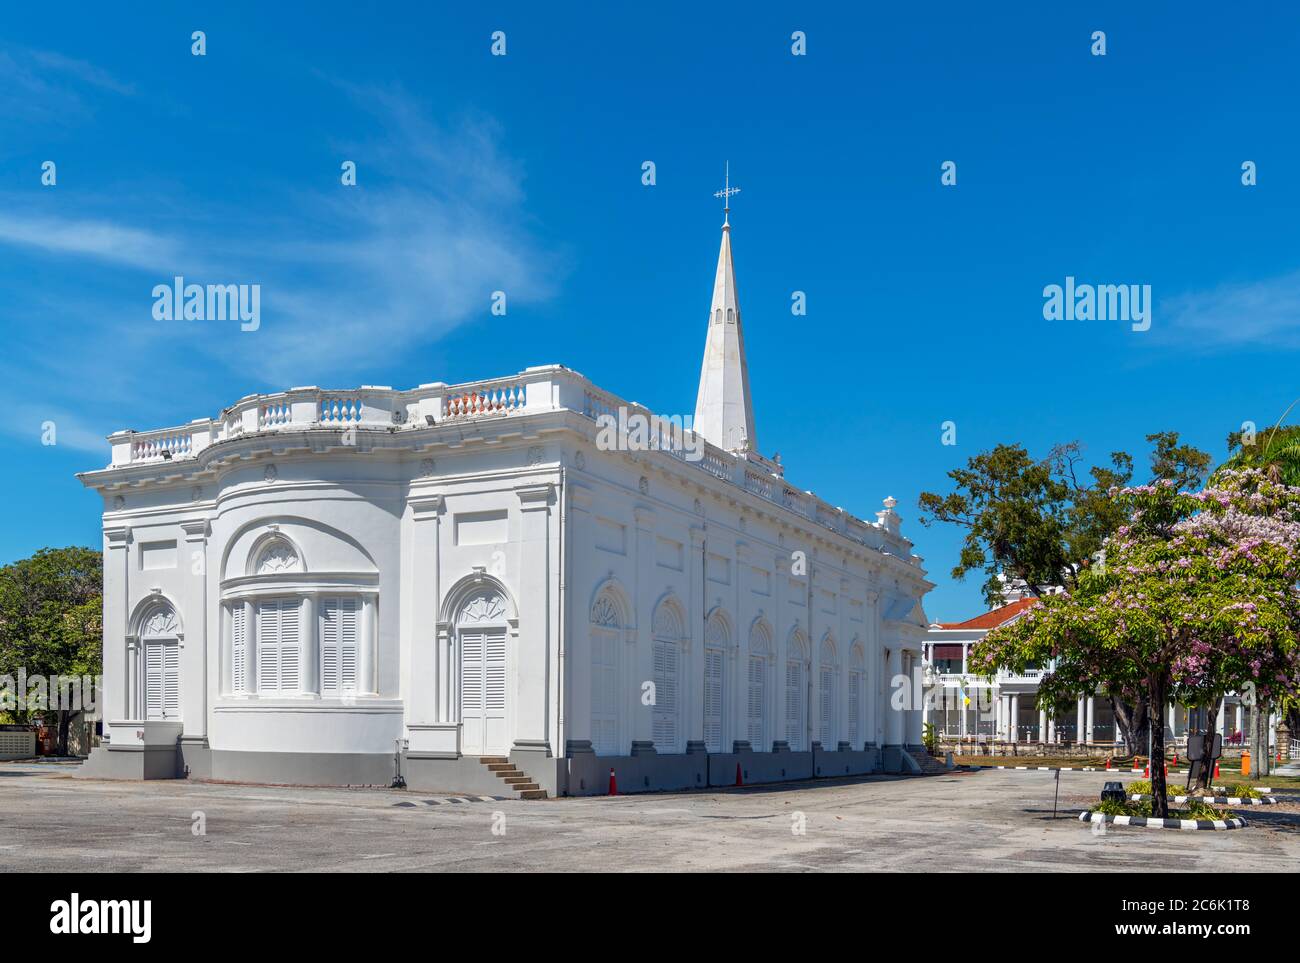 St. George's Anglikanische Kirche, Farquhar Street, Colonial District, George Town, Penang, Malaysia Stockfoto